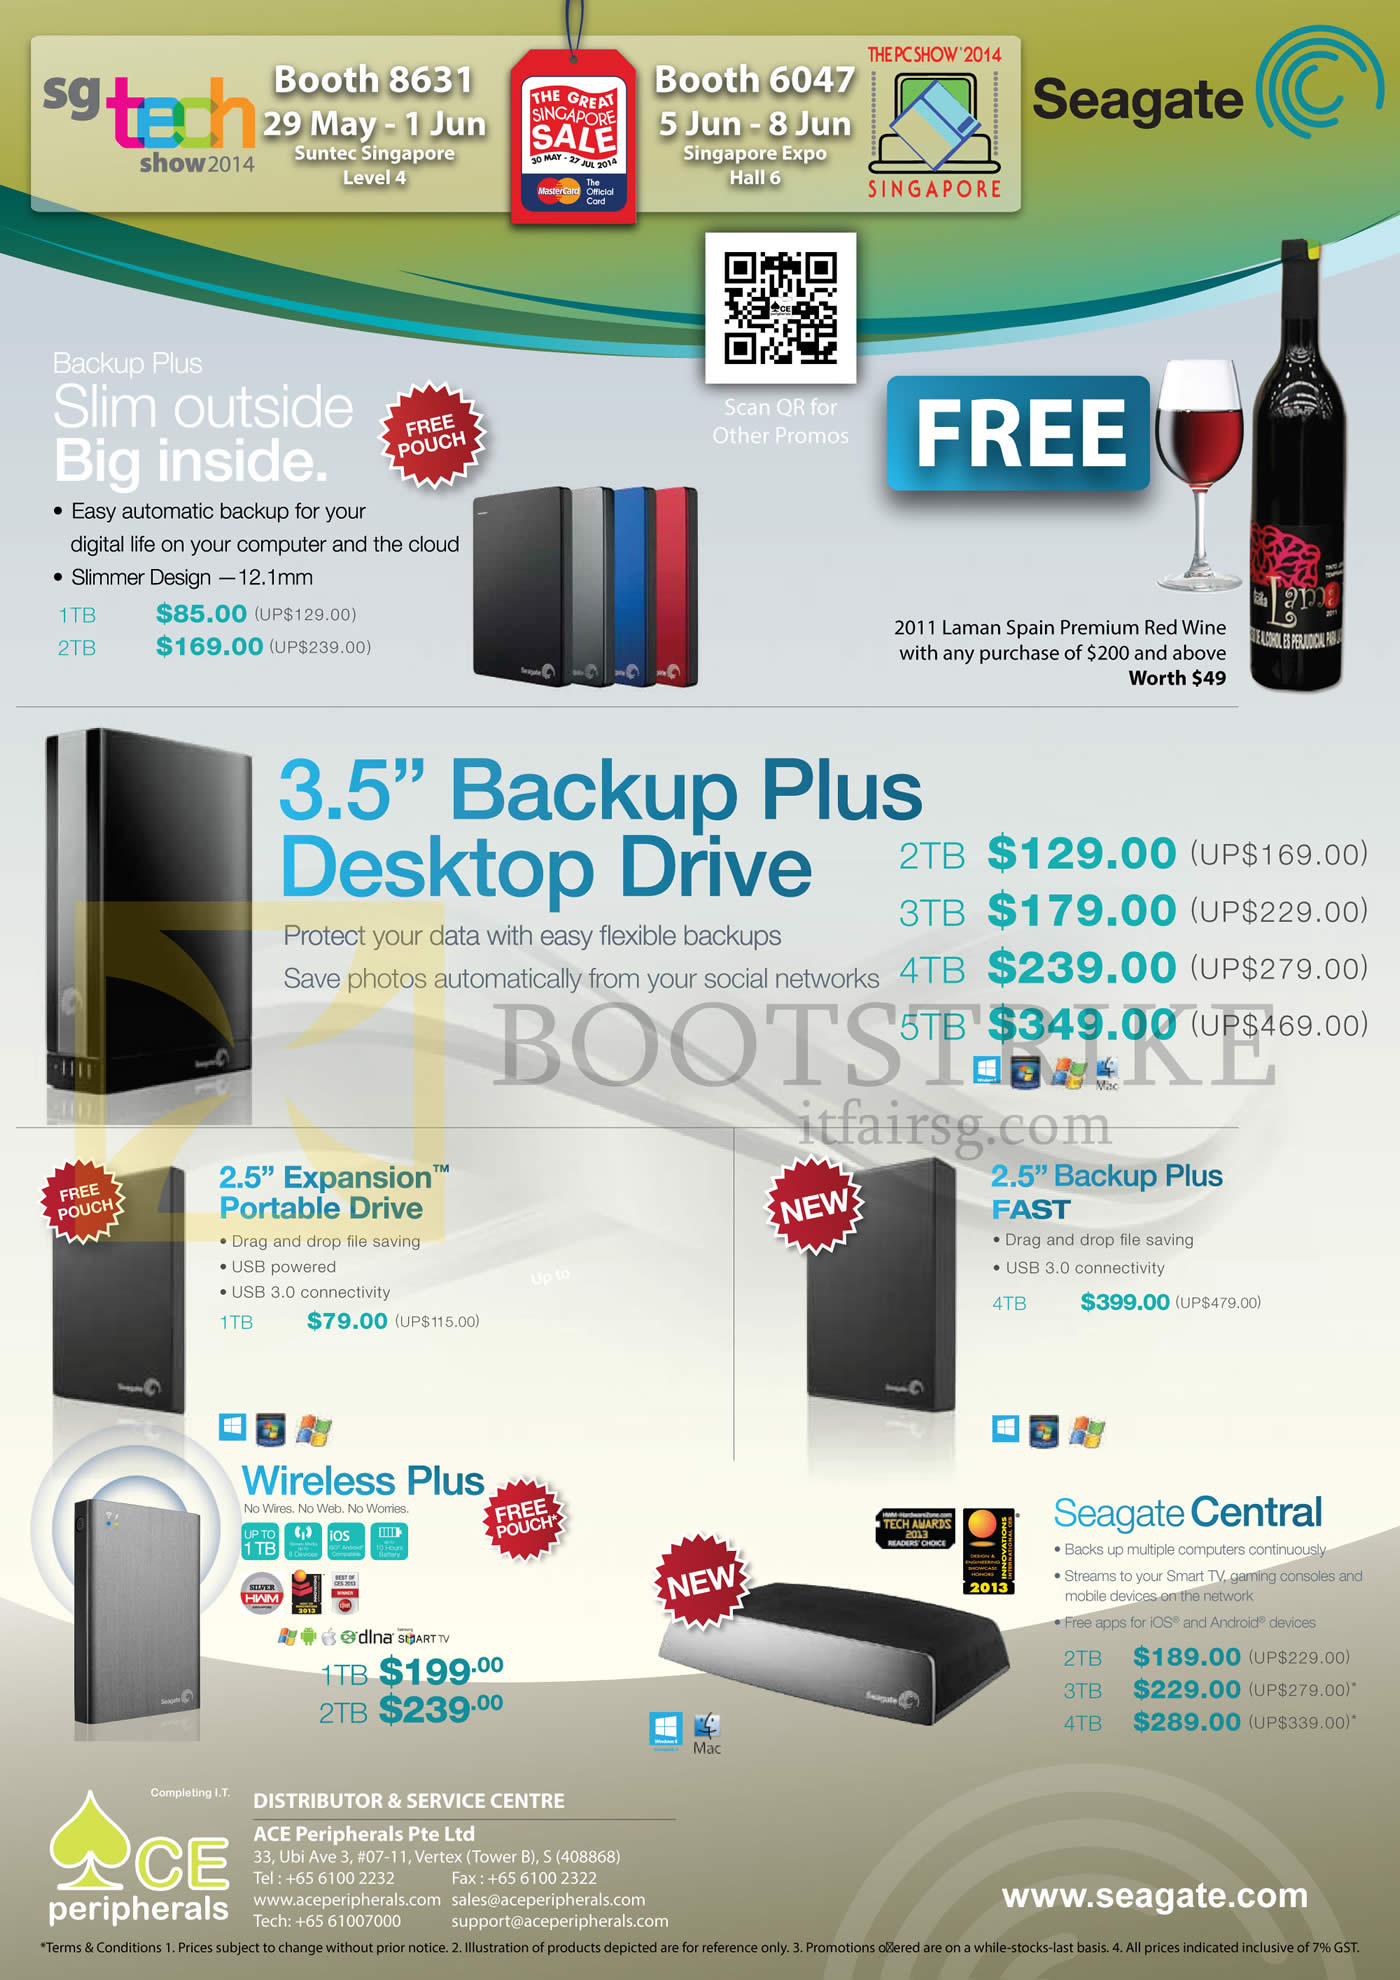 PC SHOW 2014 price list image brochure of ACE Peripherals Seagate External Storage Backup Plus, Expansion, Backup Plus, Wireless Plus, Portable, Fast, Central 1TB 2TB 3TB 4TB 5tb